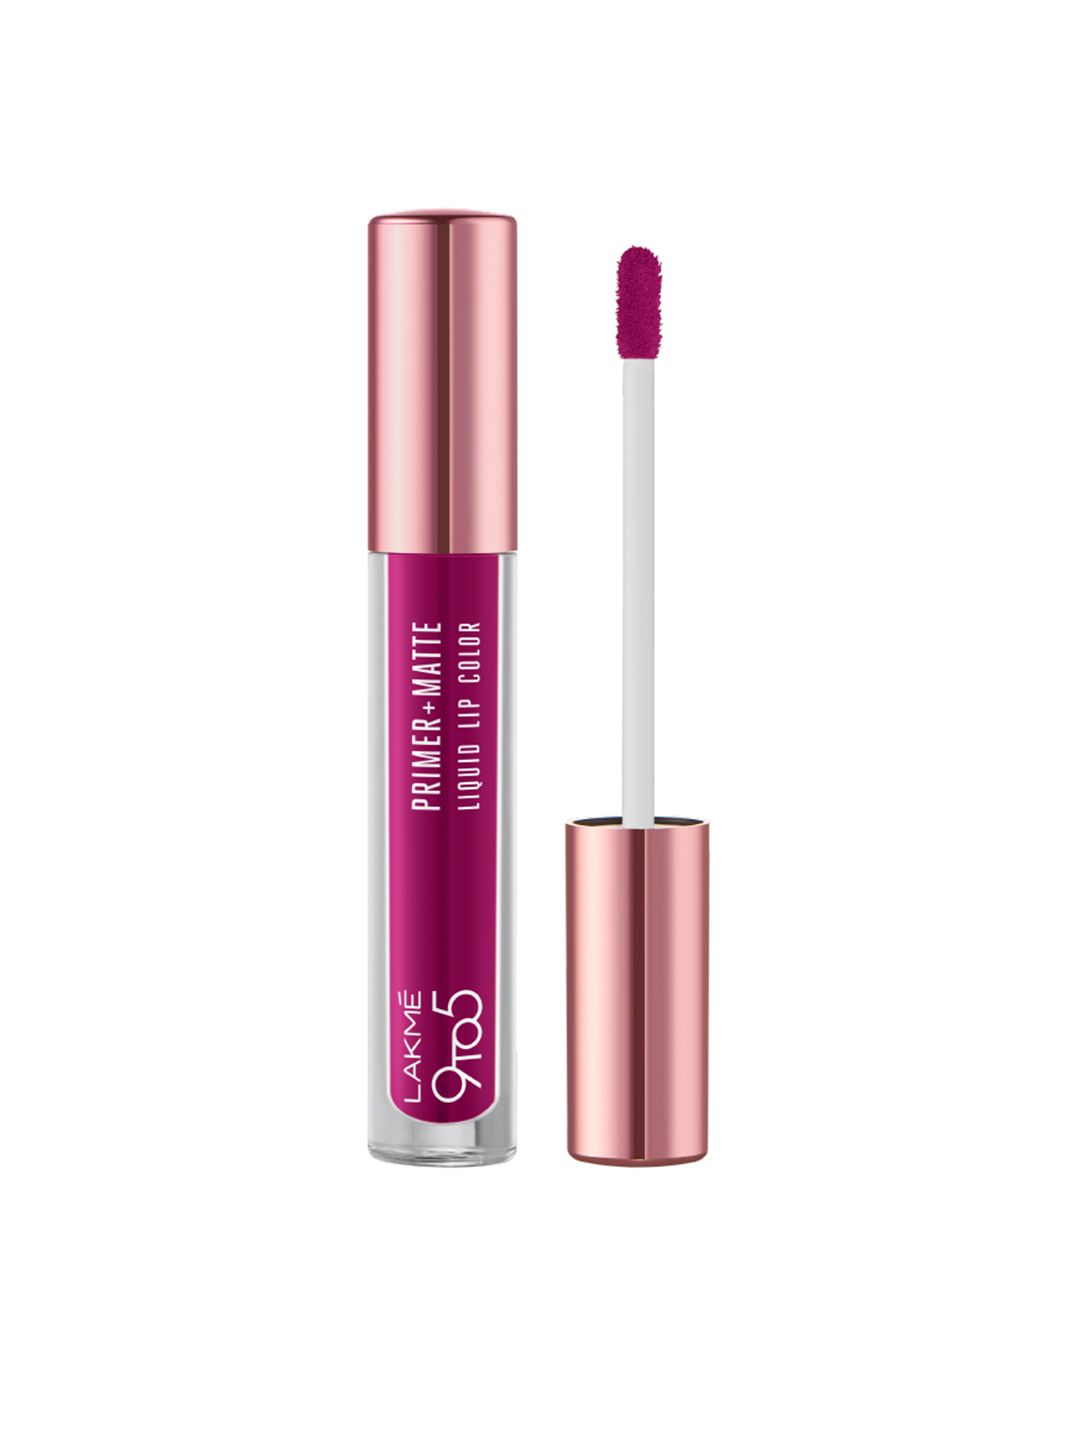 Lakme 9to5 Primer+Matte Liquid Lip Color with Vit-E and Argan Oil 4.2ml -Passion Berry MM2 Price in India